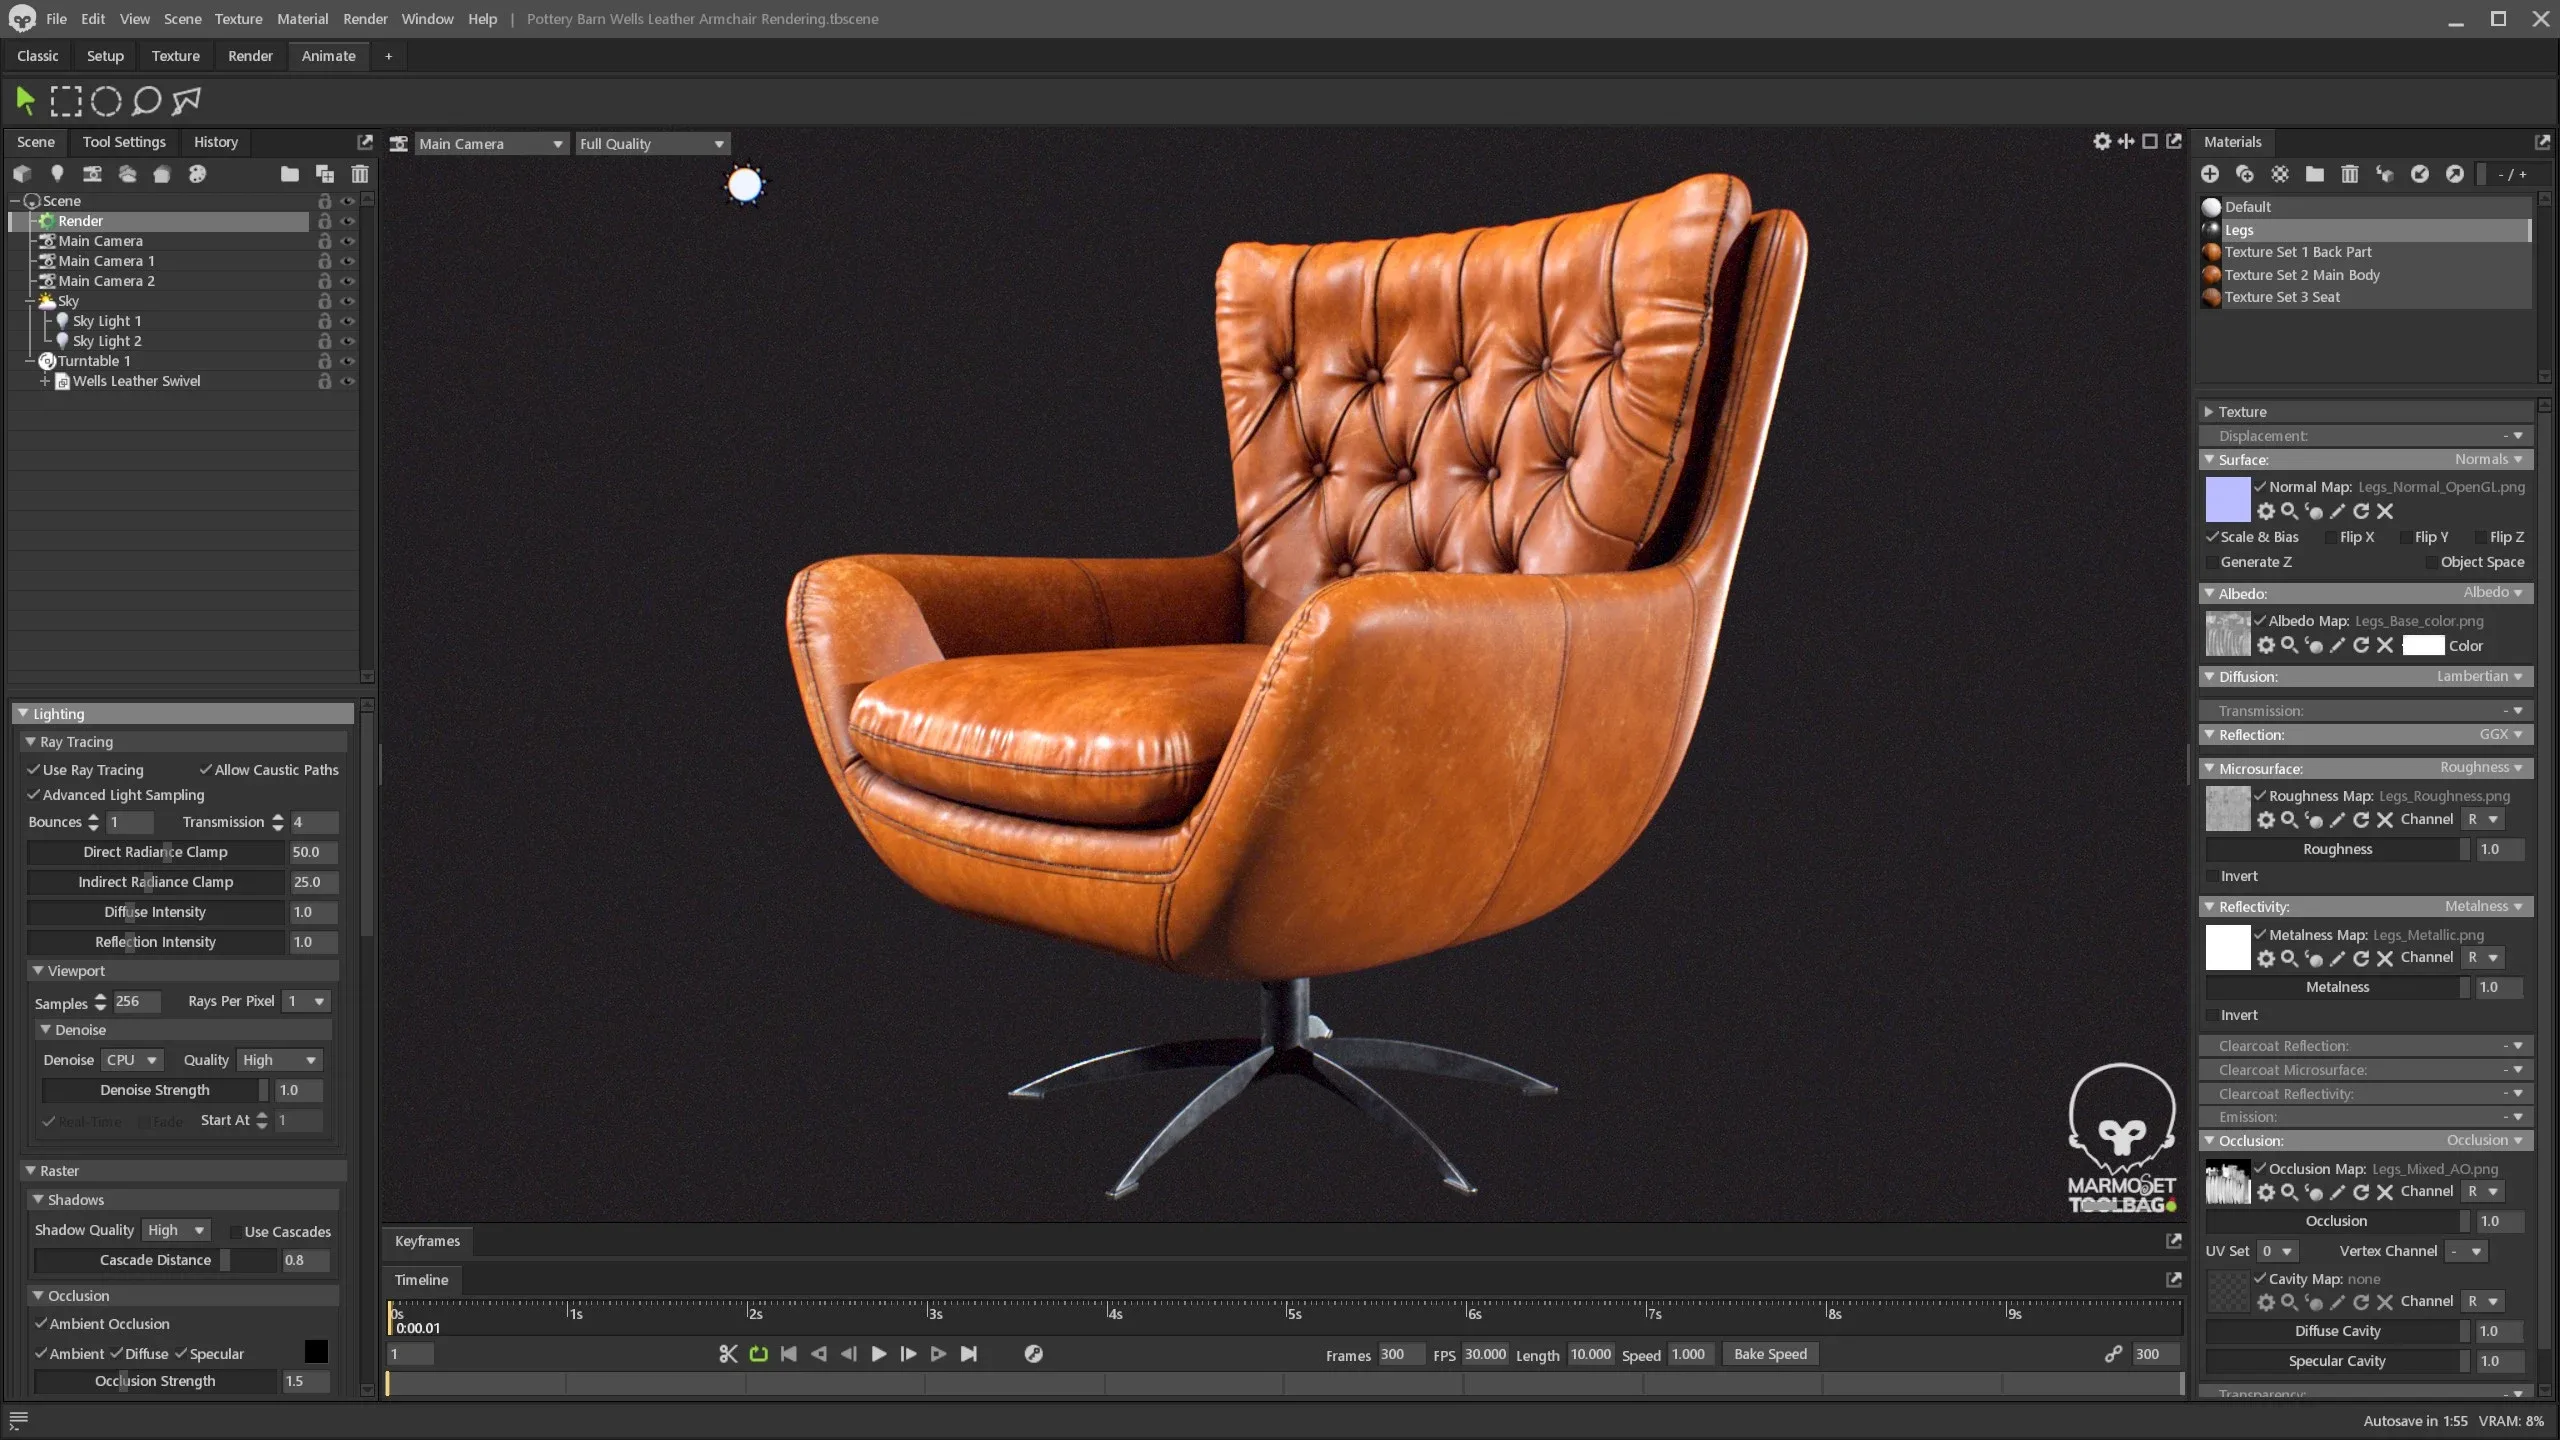 Texturing Process of a Worn Leather Armchair in Substance 3D Painter + Marmoset Rendering